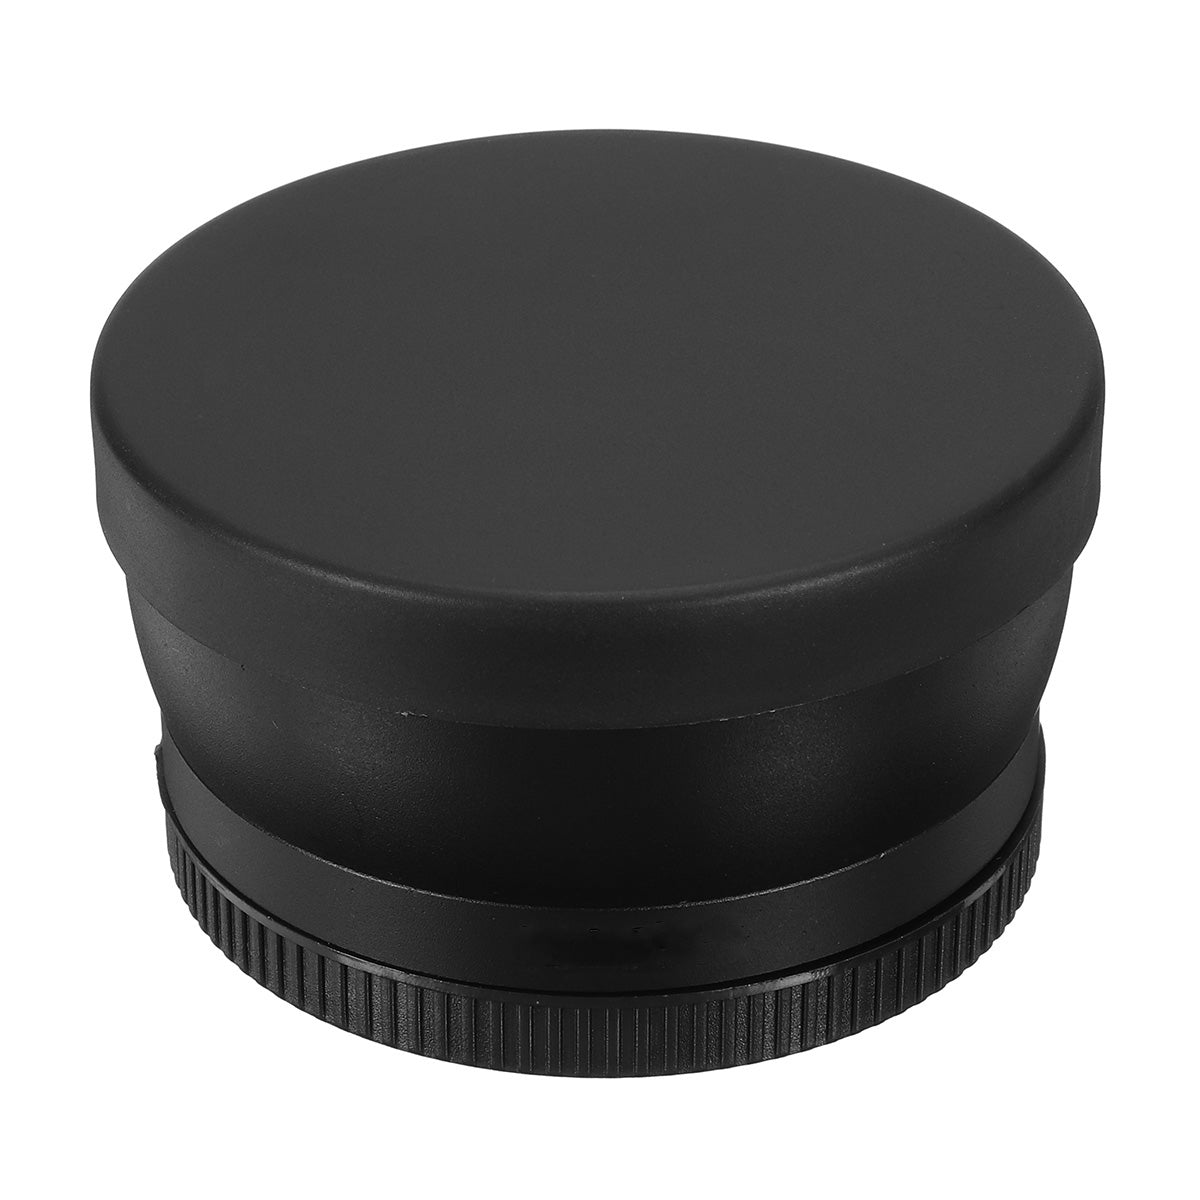 58mm 0.45X Super Wide Angle Lens For Canon EOS 1000D 1100D 500D Rebel T1i T2i T3